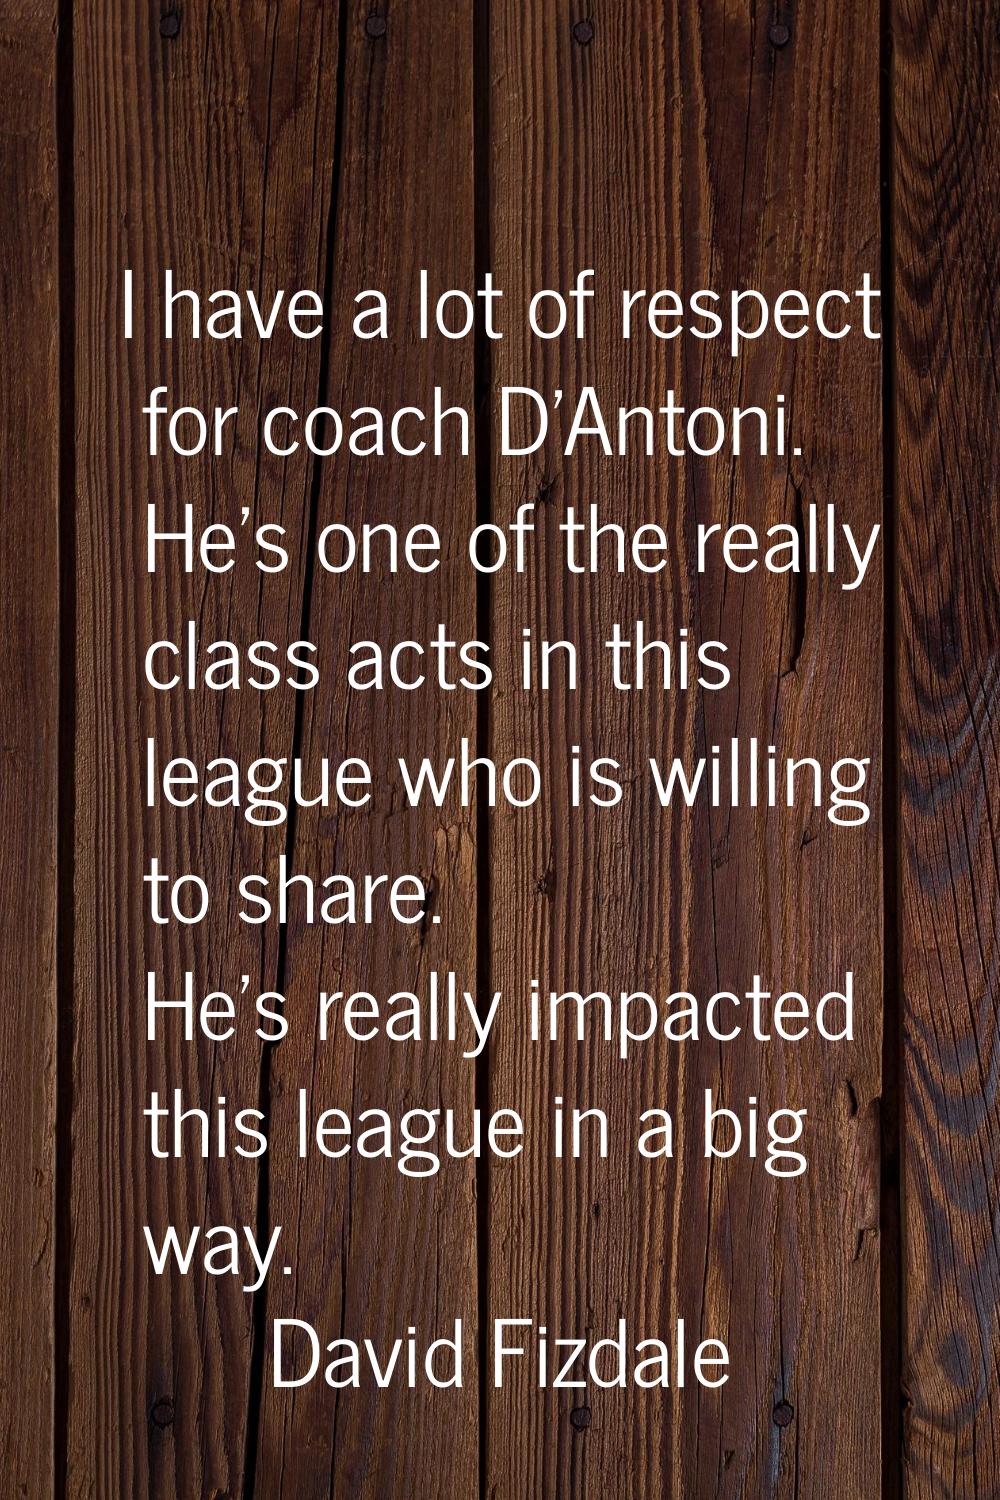 I have a lot of respect for coach D'Antoni. He's one of the really class acts in this league who is